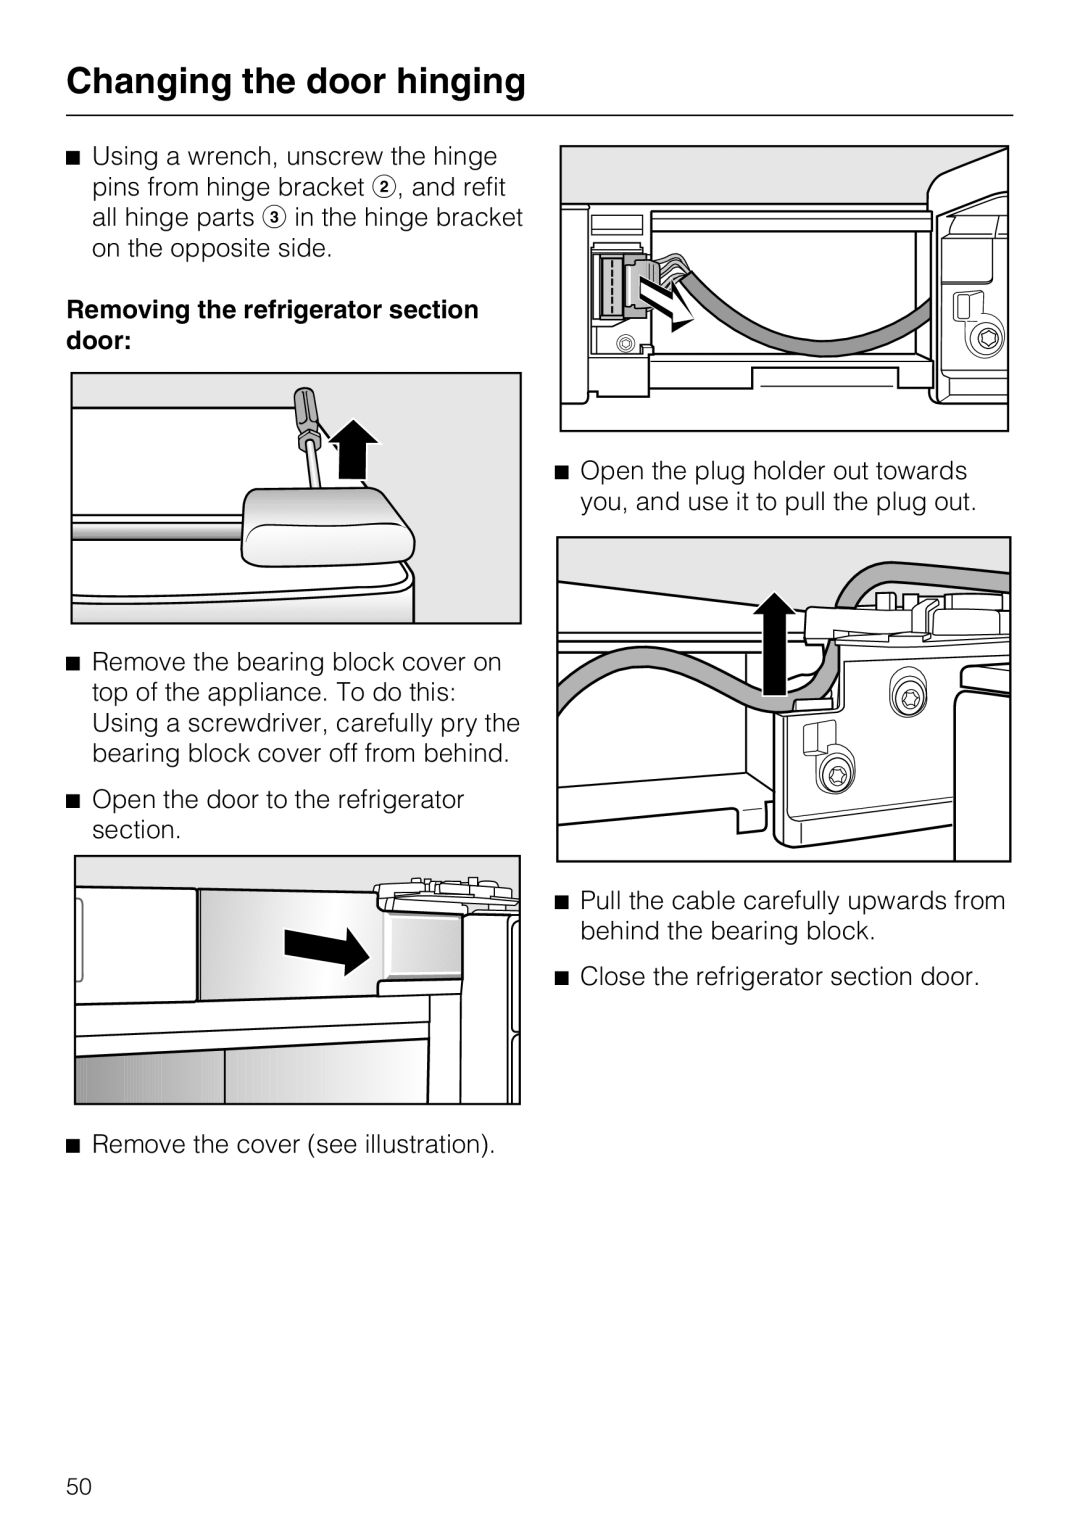 Miele KFN 8995 SD ED-1, KFN 8996 SDE ED-1 Removing the refrigerator section door, Remove the cover see illustration 